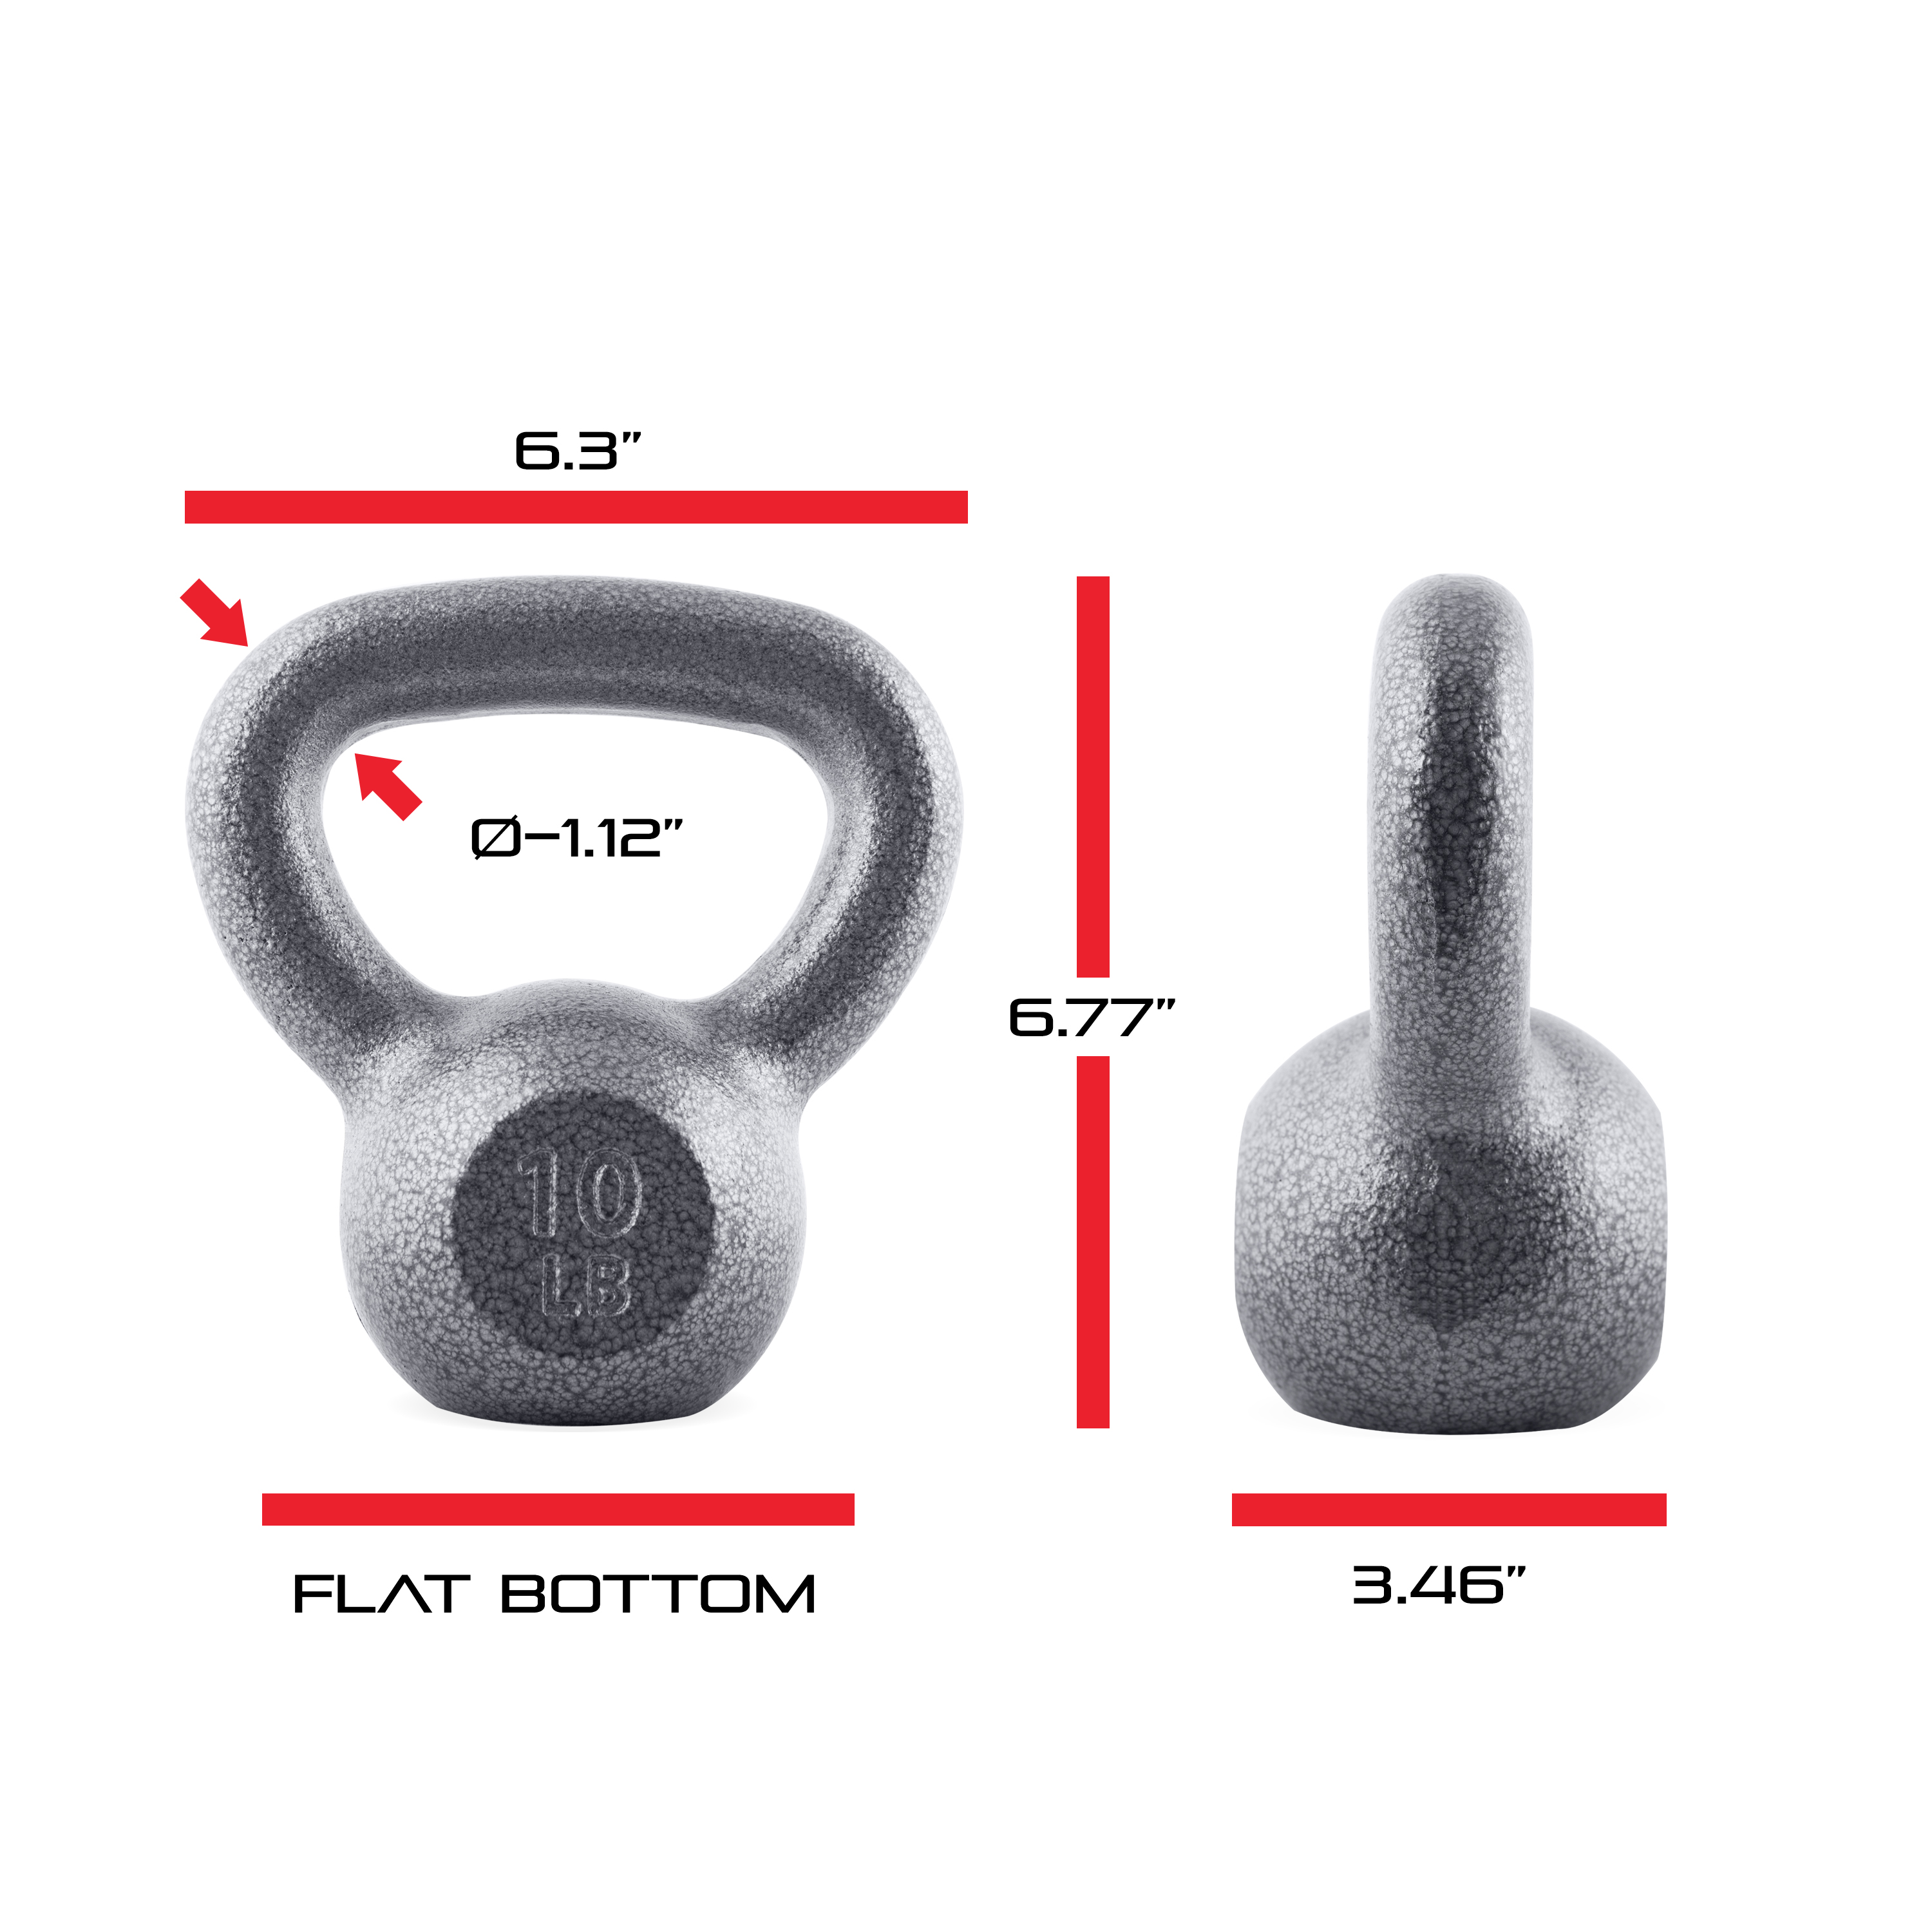 CAP Barbell Cast Iron Kettlebell, Single, 10-80 Pounds - image 2 of 7